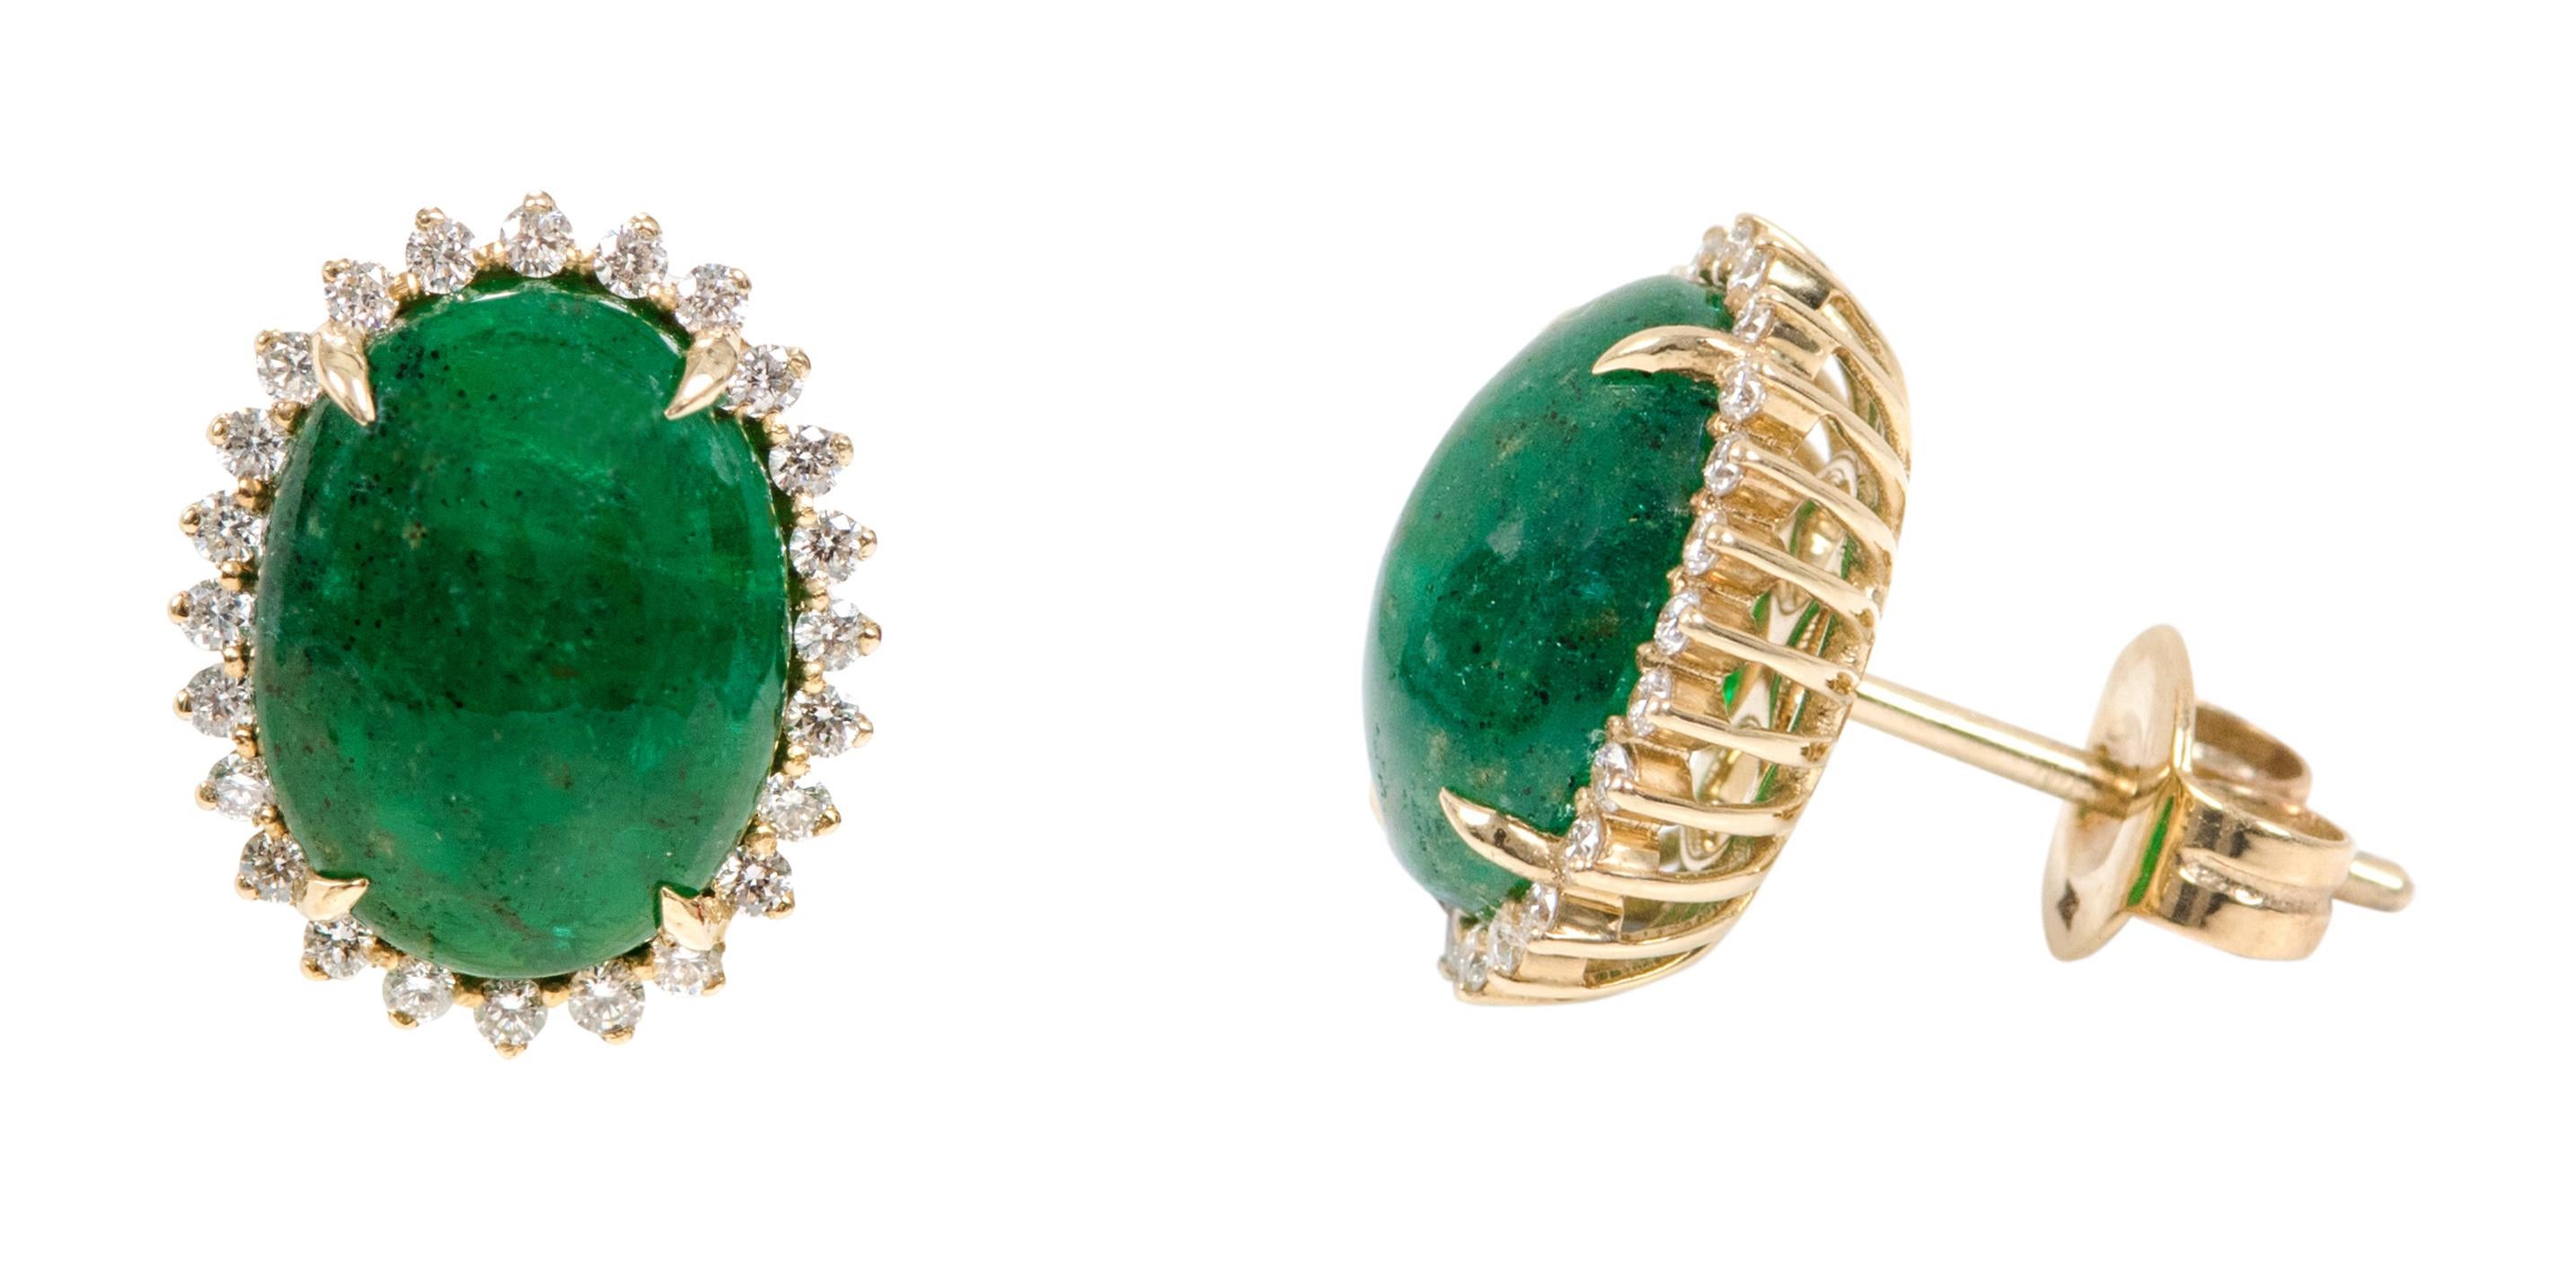 18 Karat Yellow Gold 6.62 Carat Natural Cabochon Emerald and Diamond Cluster Stud Earrings 

This elegant pine green emerald and diamond halo cluster earring is timeless. The fantastic solitaire emerald oval cabochon in an eagle-prong setting is